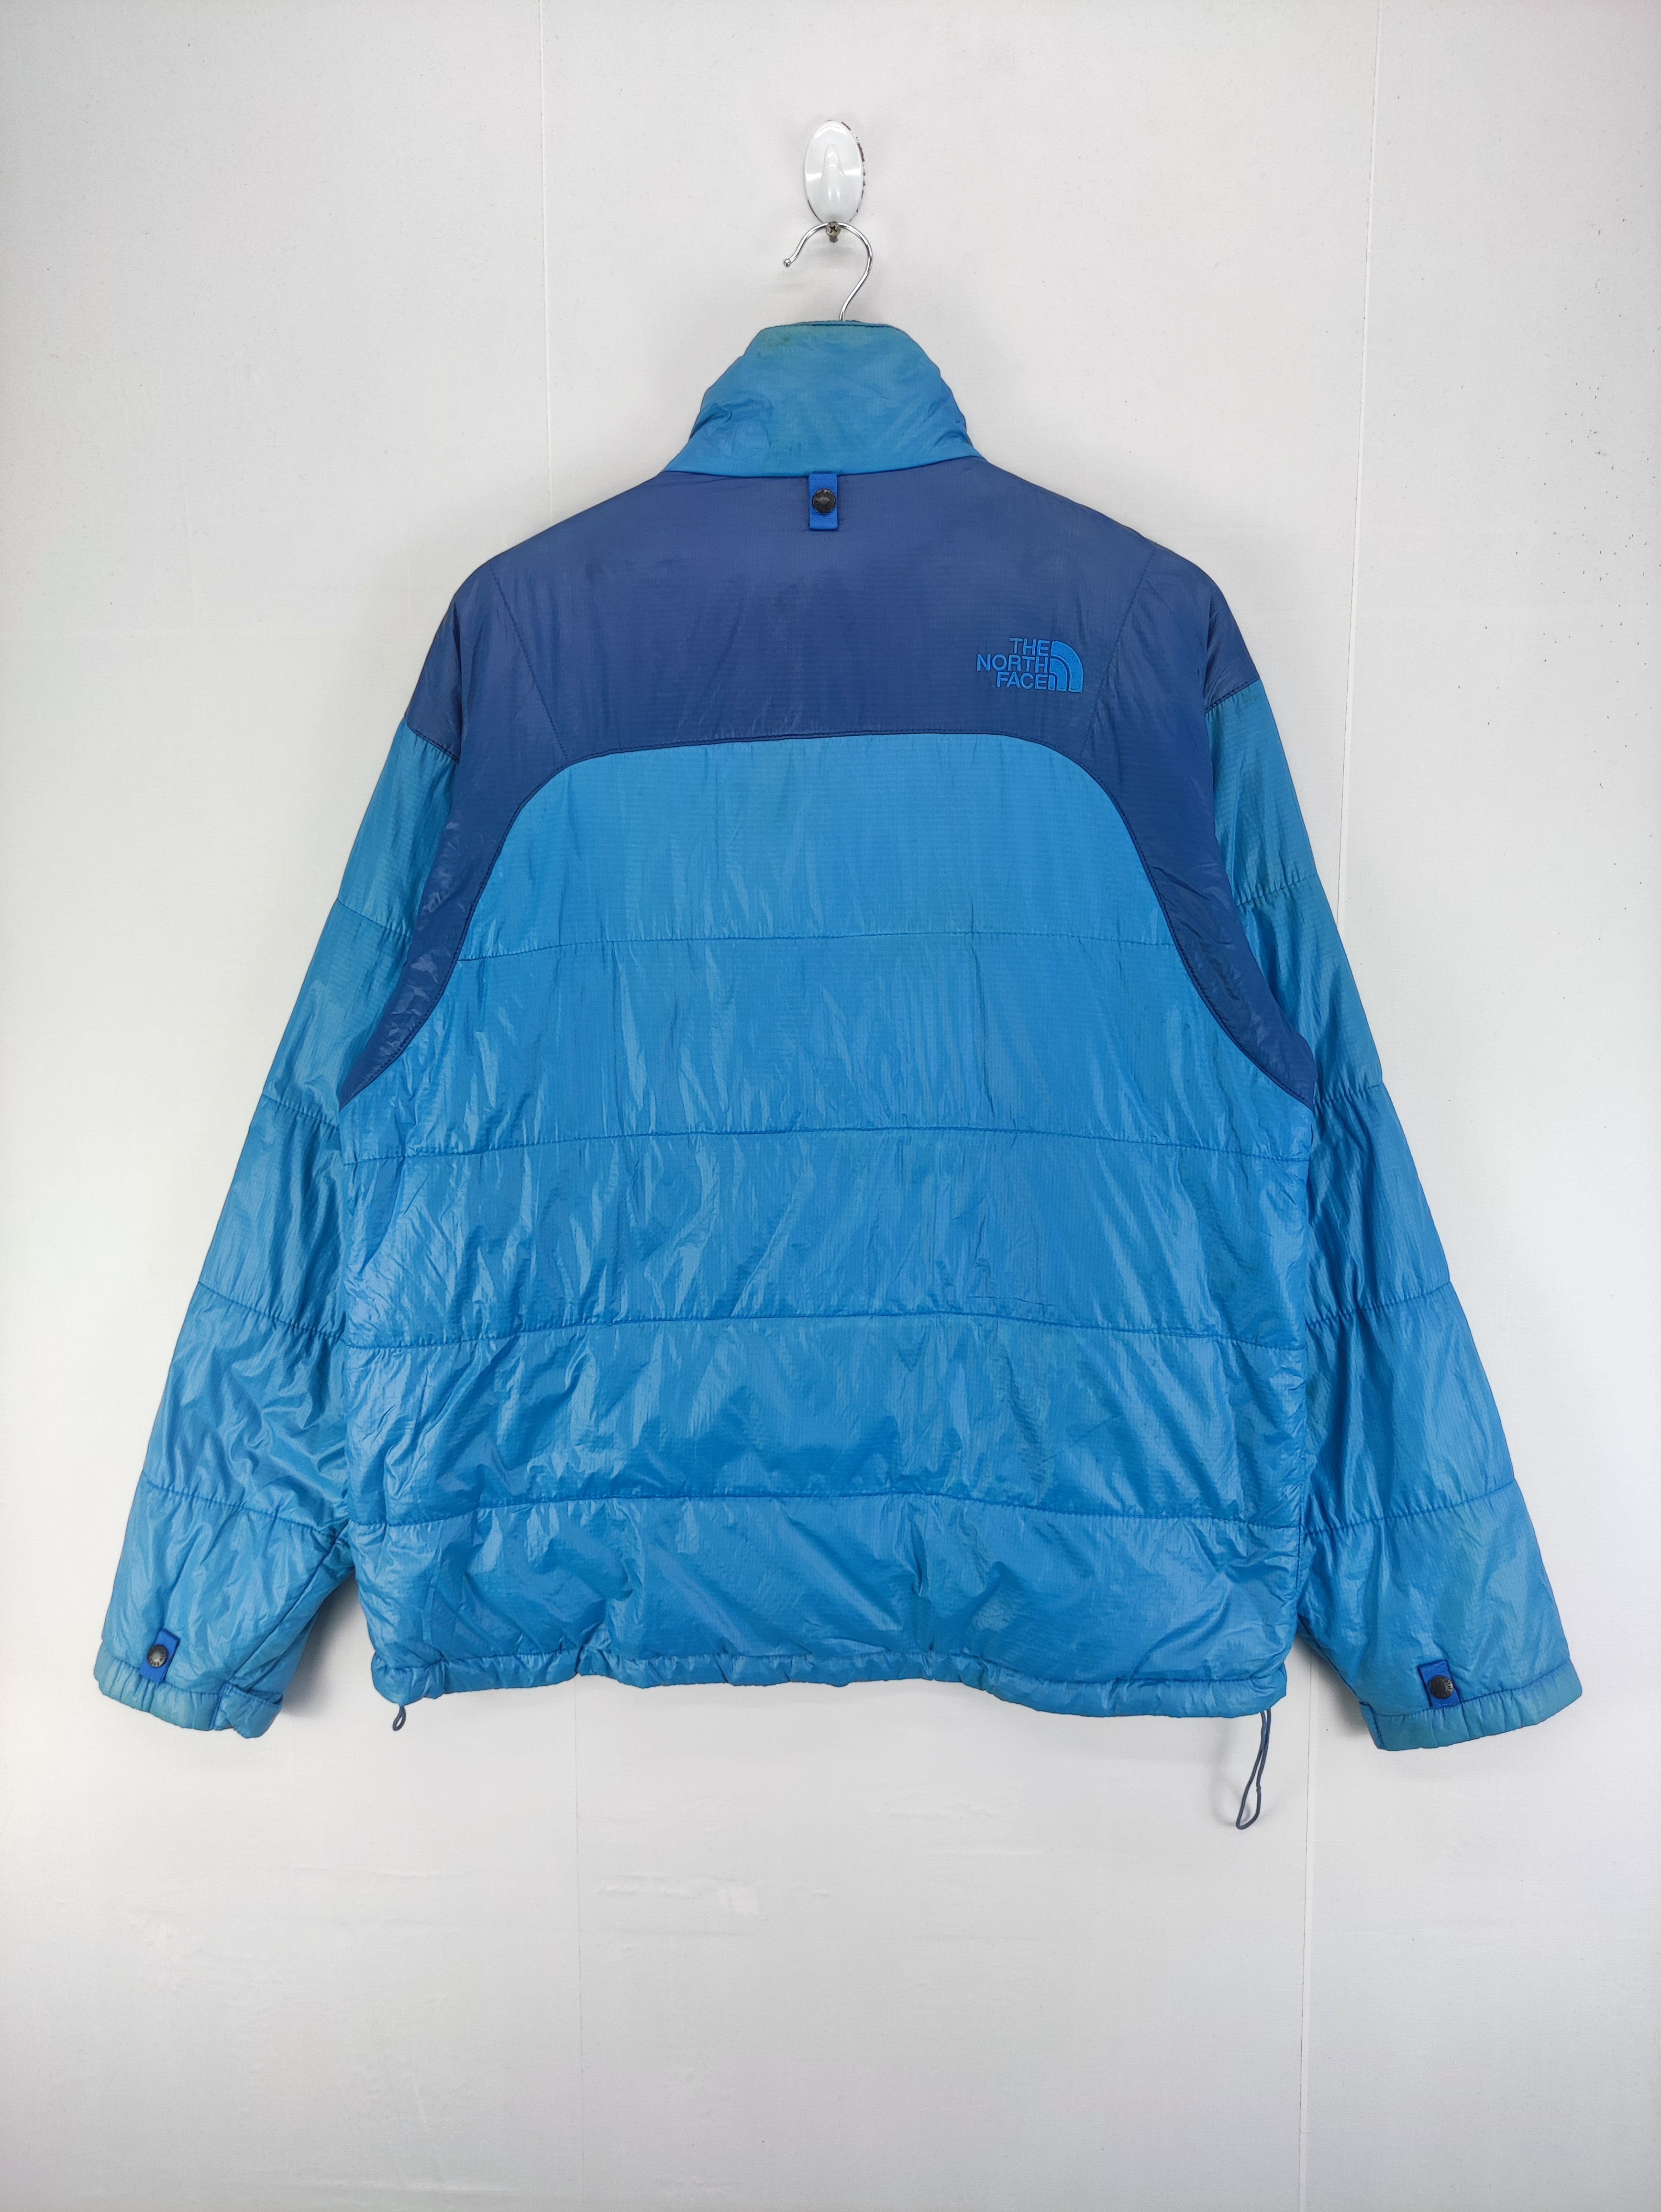 Outdoor Style Go Out! - The North Face Jacket Zipper - 18